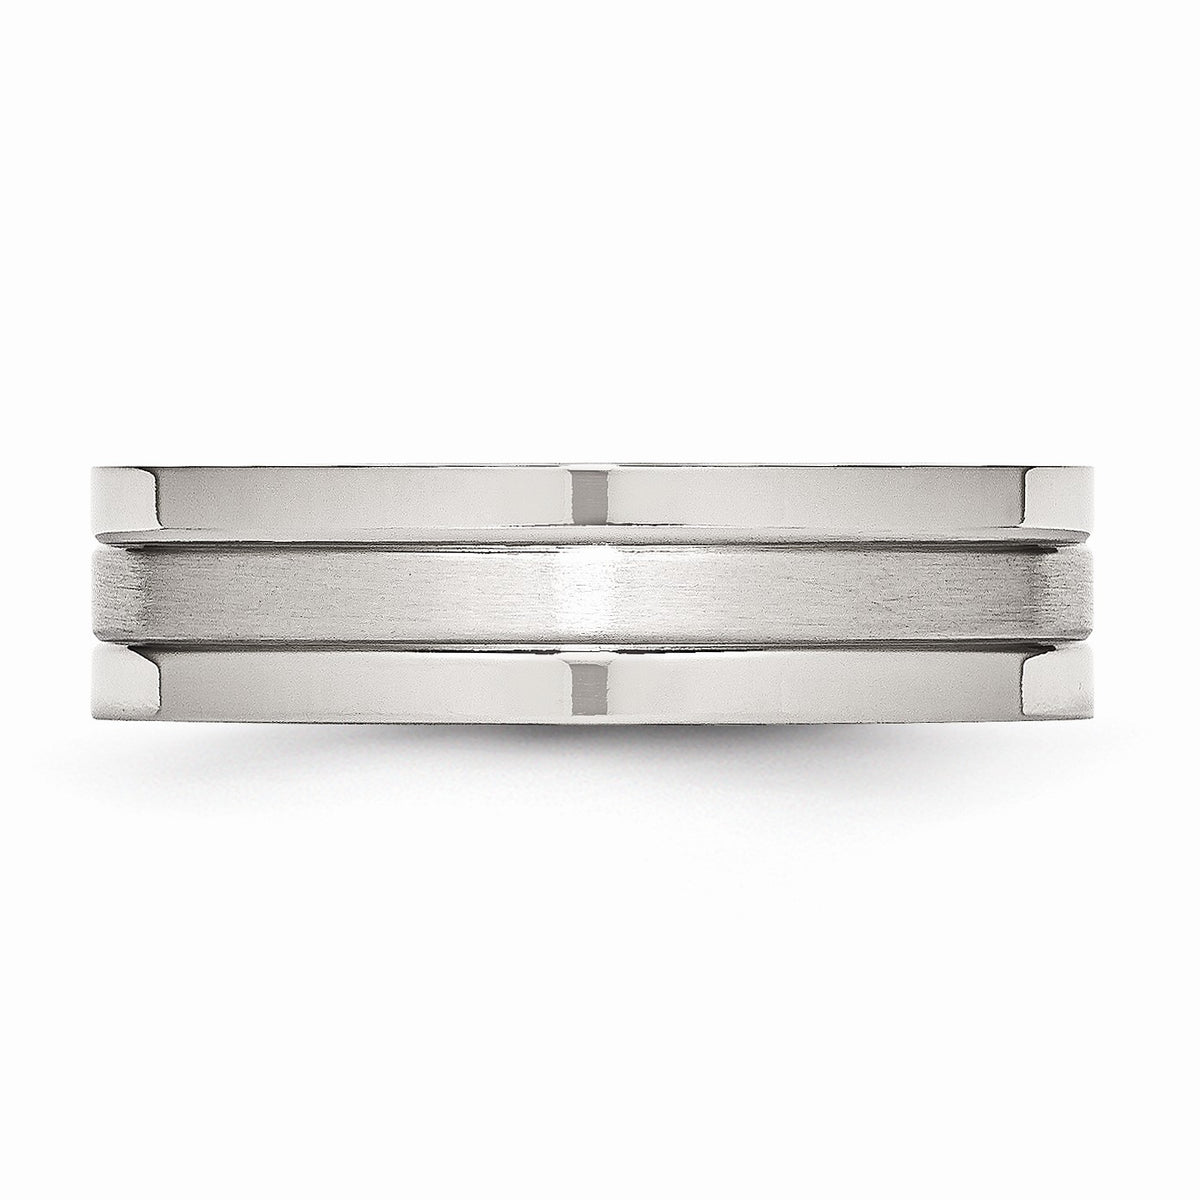 Alternate view of the Stainless Steel, 6mm Flat Grooved Unisex Comfort Fit Band by The Black Bow Jewelry Co.